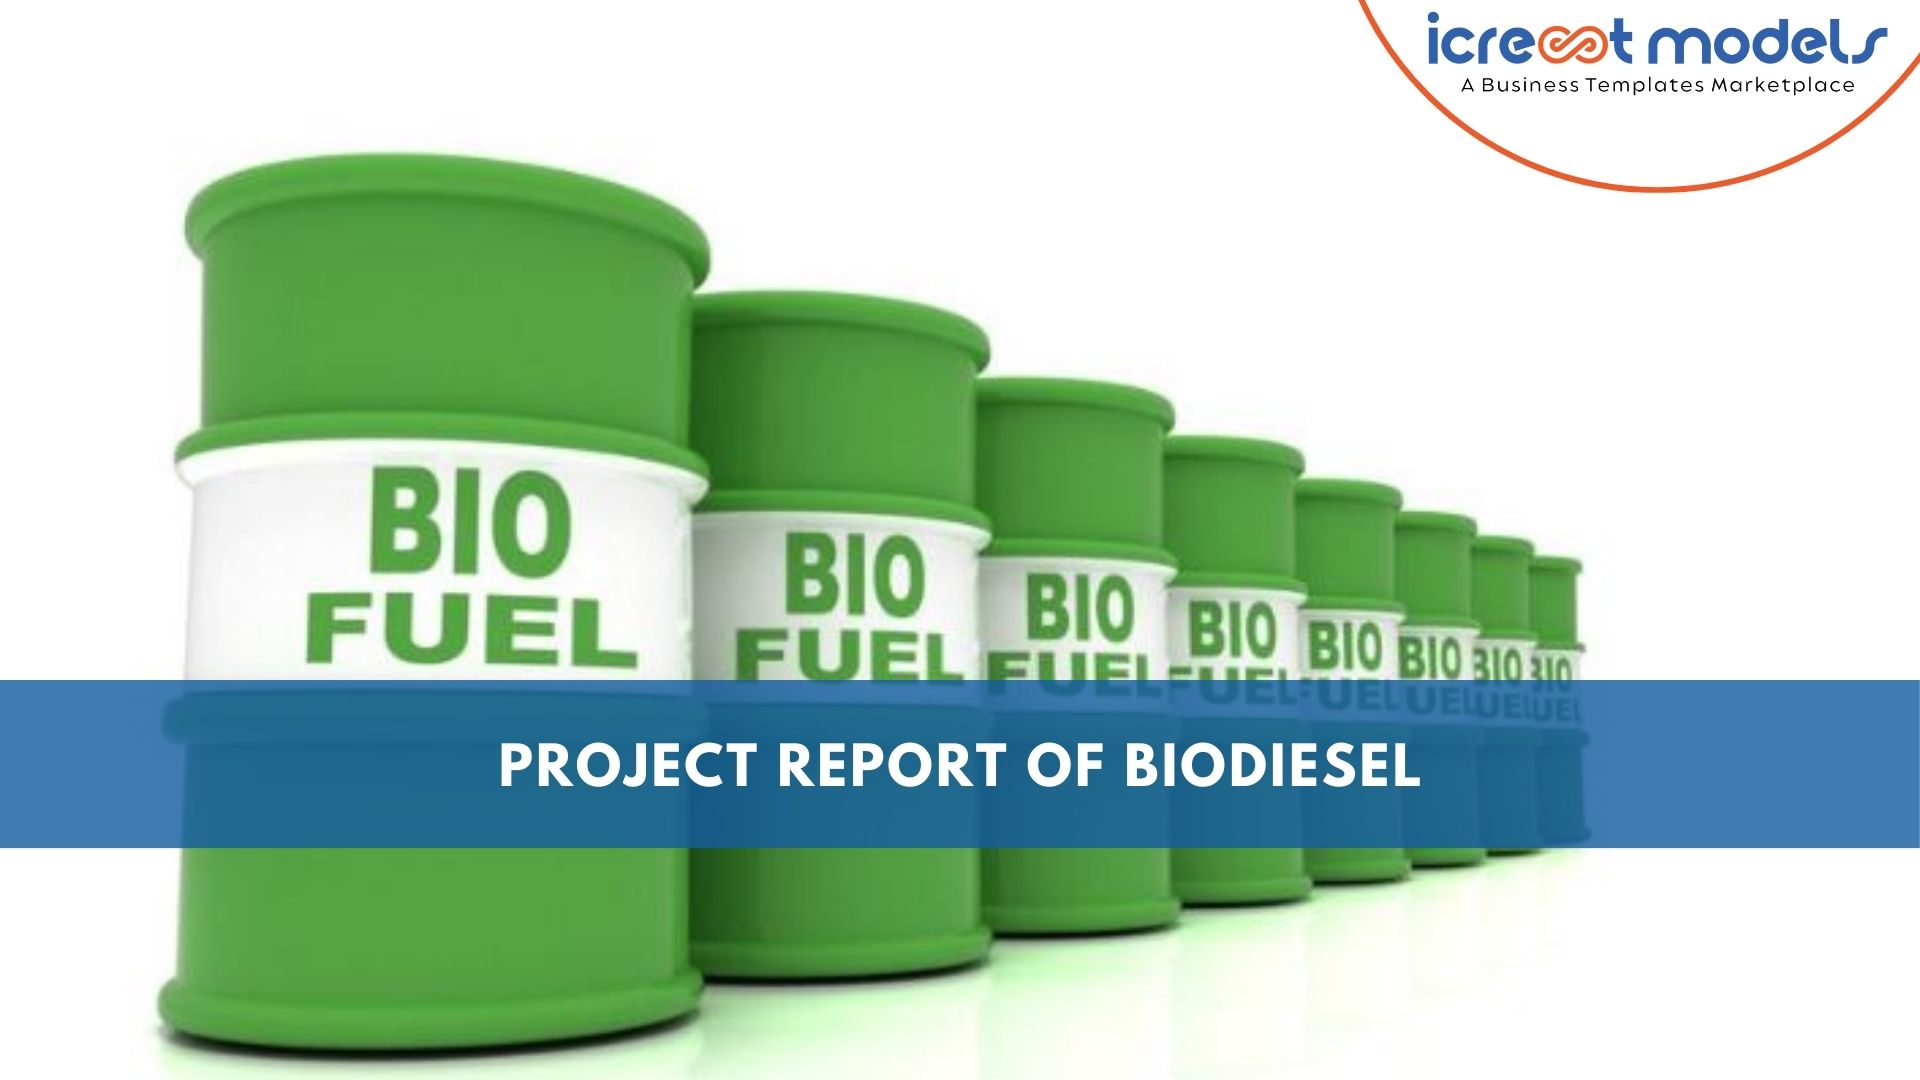 PROJECT REPORT OF BIODIESEL